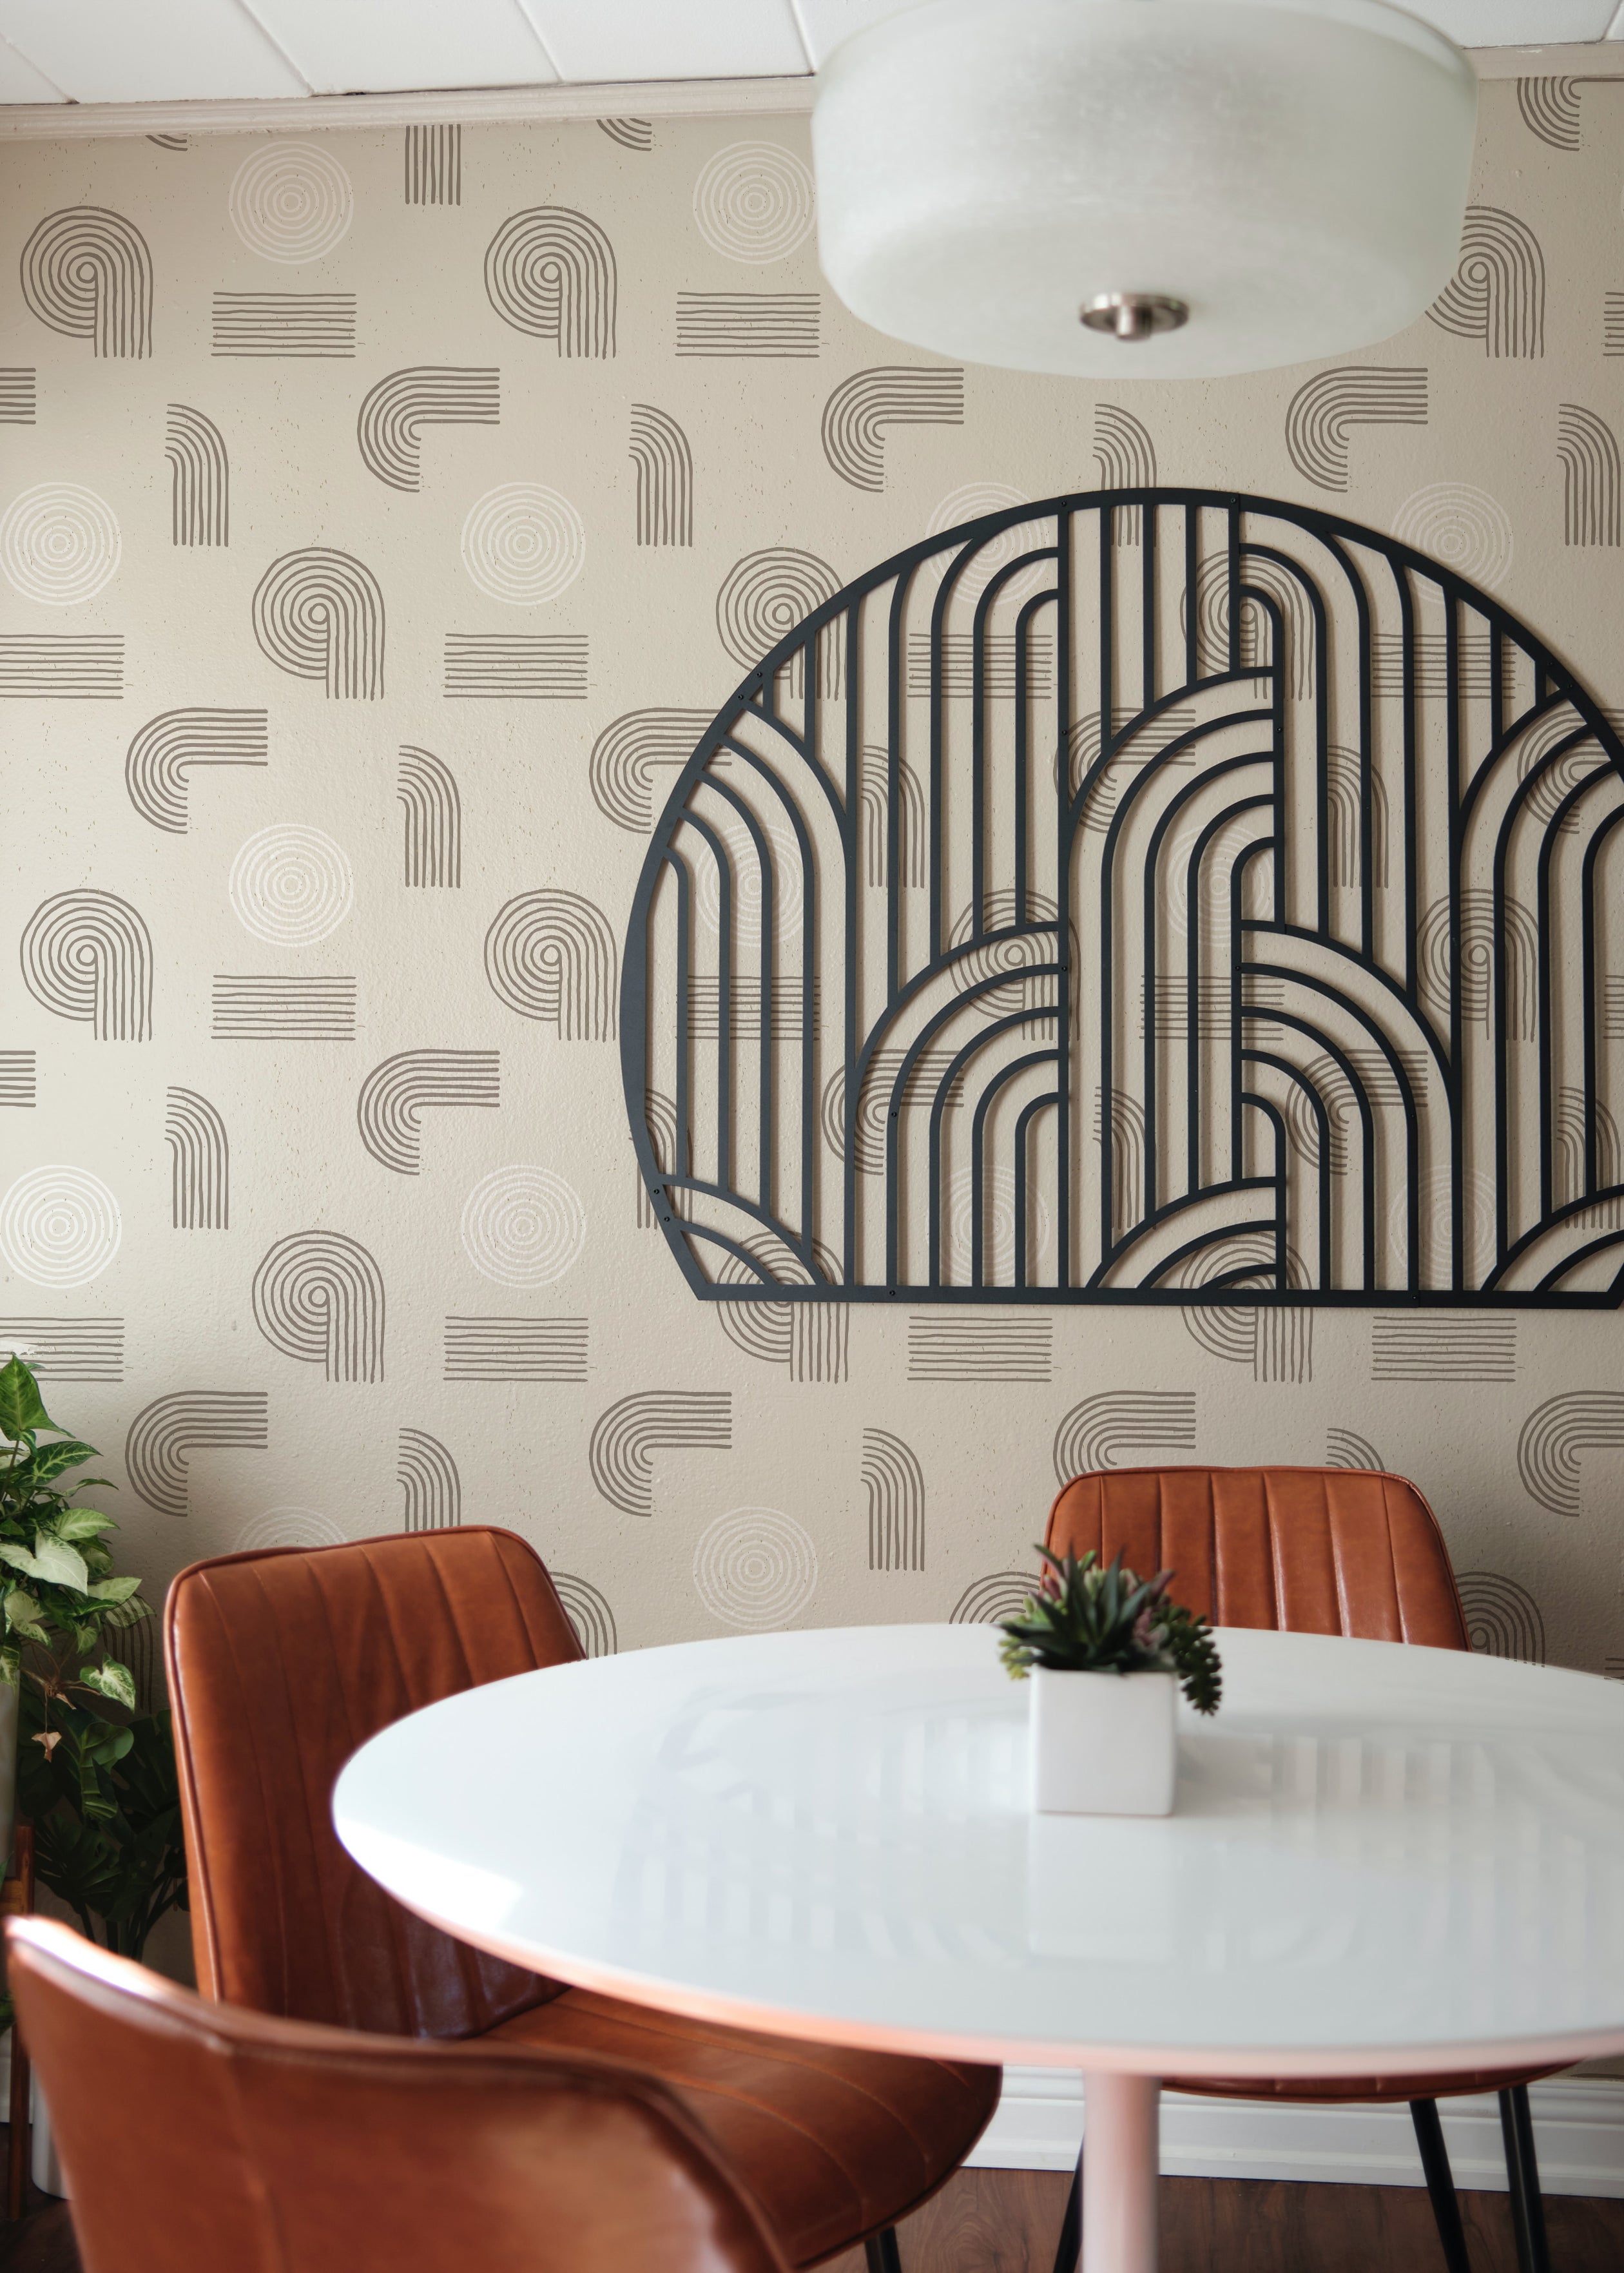 A modern dining space featuring Sand Zen Geometric Wallpaper - VII, characterized by abstract patterns of circles and curved lines in muted beige and off-white tones. The space includes a white round table, brown leather chairs, and a decorative metal wall art, enhancing the minimalist aesthetic.